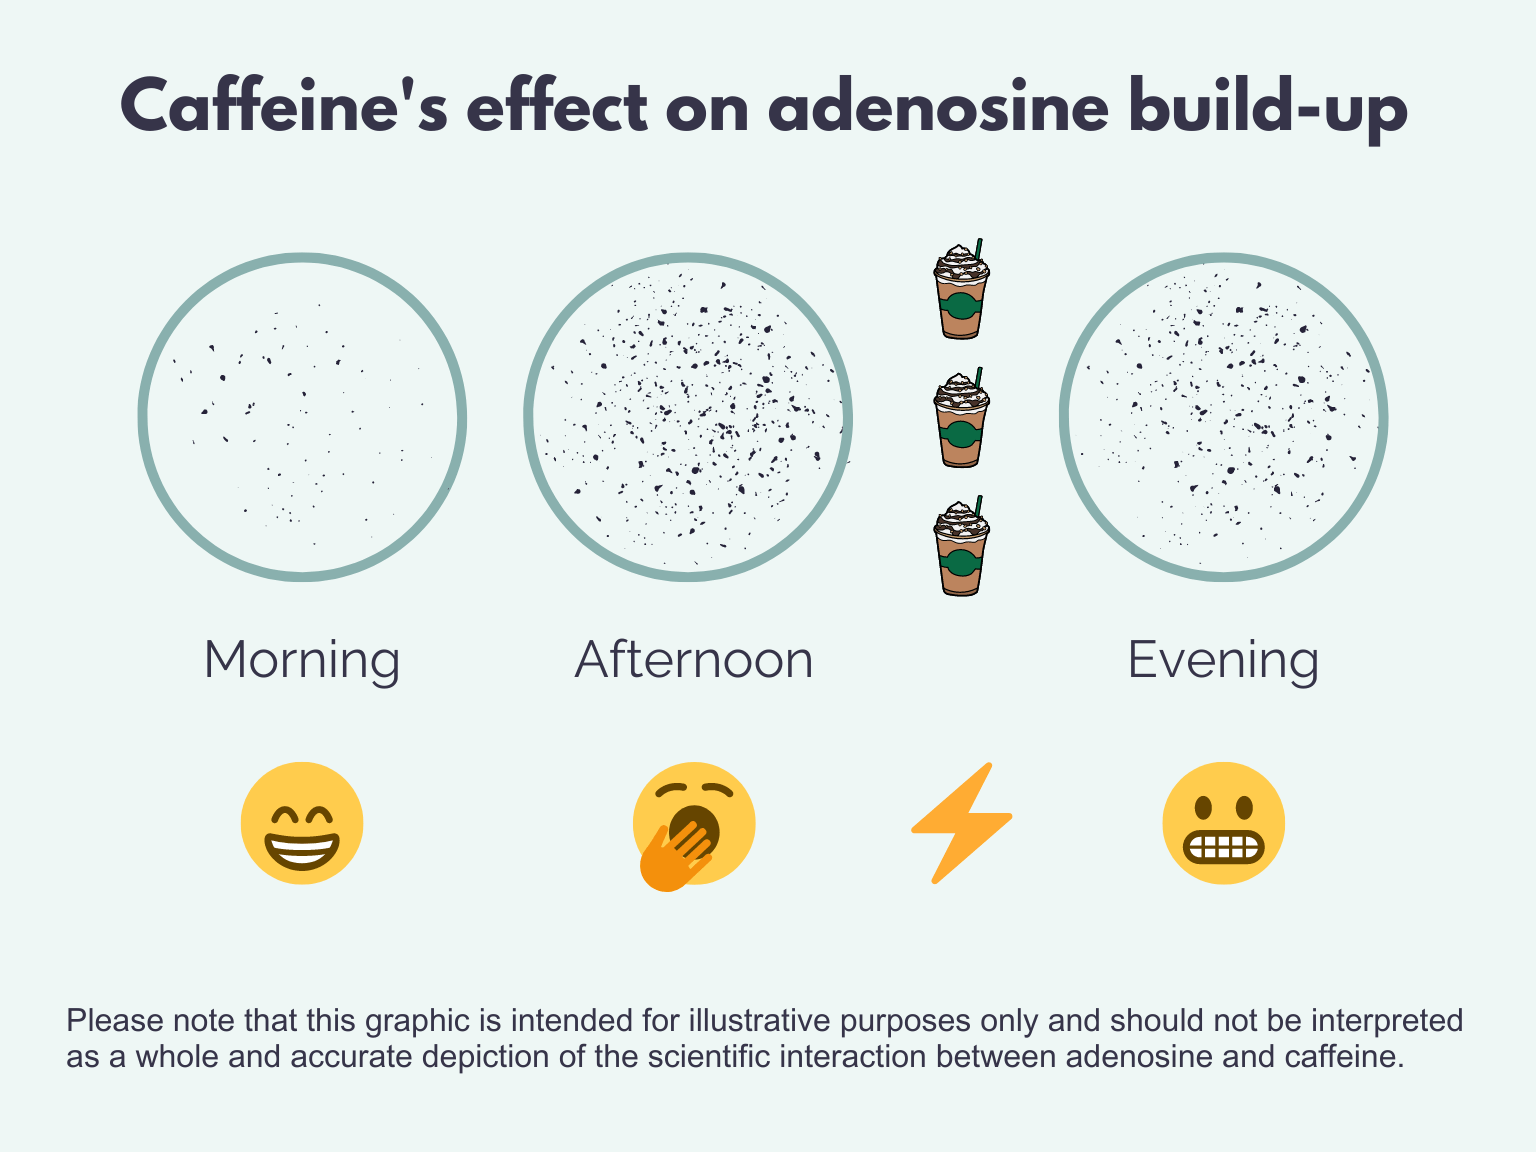 Title: caffeine's effect on adenosine build-up. Morning shows light specks with a smiling face. afternoon shows more and a tired emoji. next is three cups of coffee and a lightning bolt emoji. last is evening with about the same amount of specks as the afternoon with an awake and grimacing emoji. Note at the bottom: Please note that this graphic is intended for illustrative purposes only and should not be interpreted as a whole and accurate depiction of the scientific interaction between adenosine and caffeine.